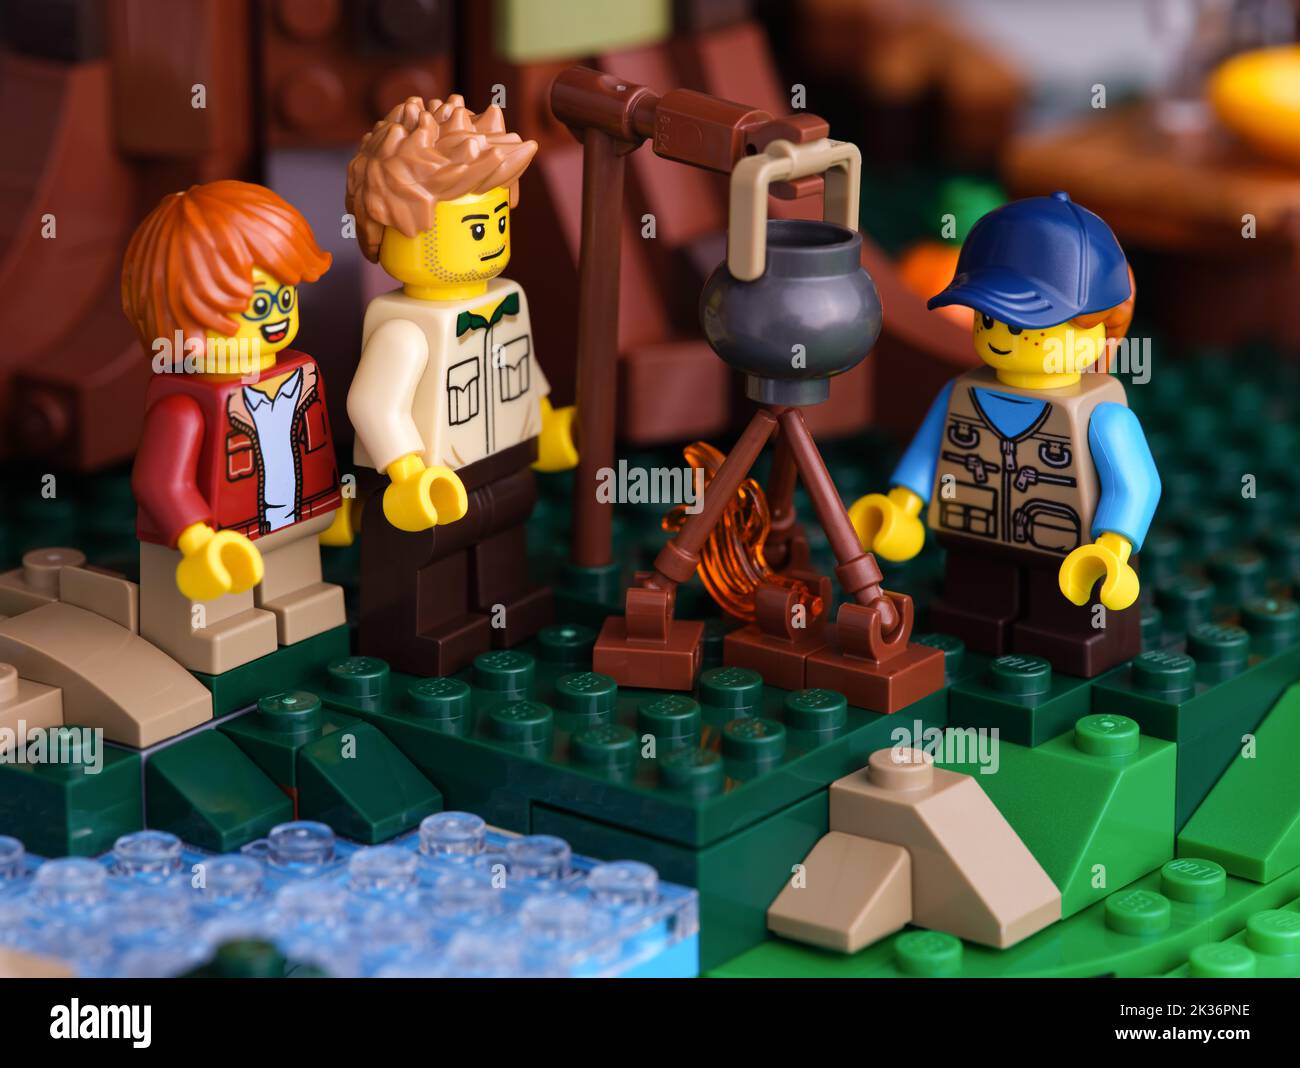 Tambov, Russian Federation - June 22, 2022  Three Lego minifigures - man and two children, cooking food on a campfire. Close-up Stock Photo